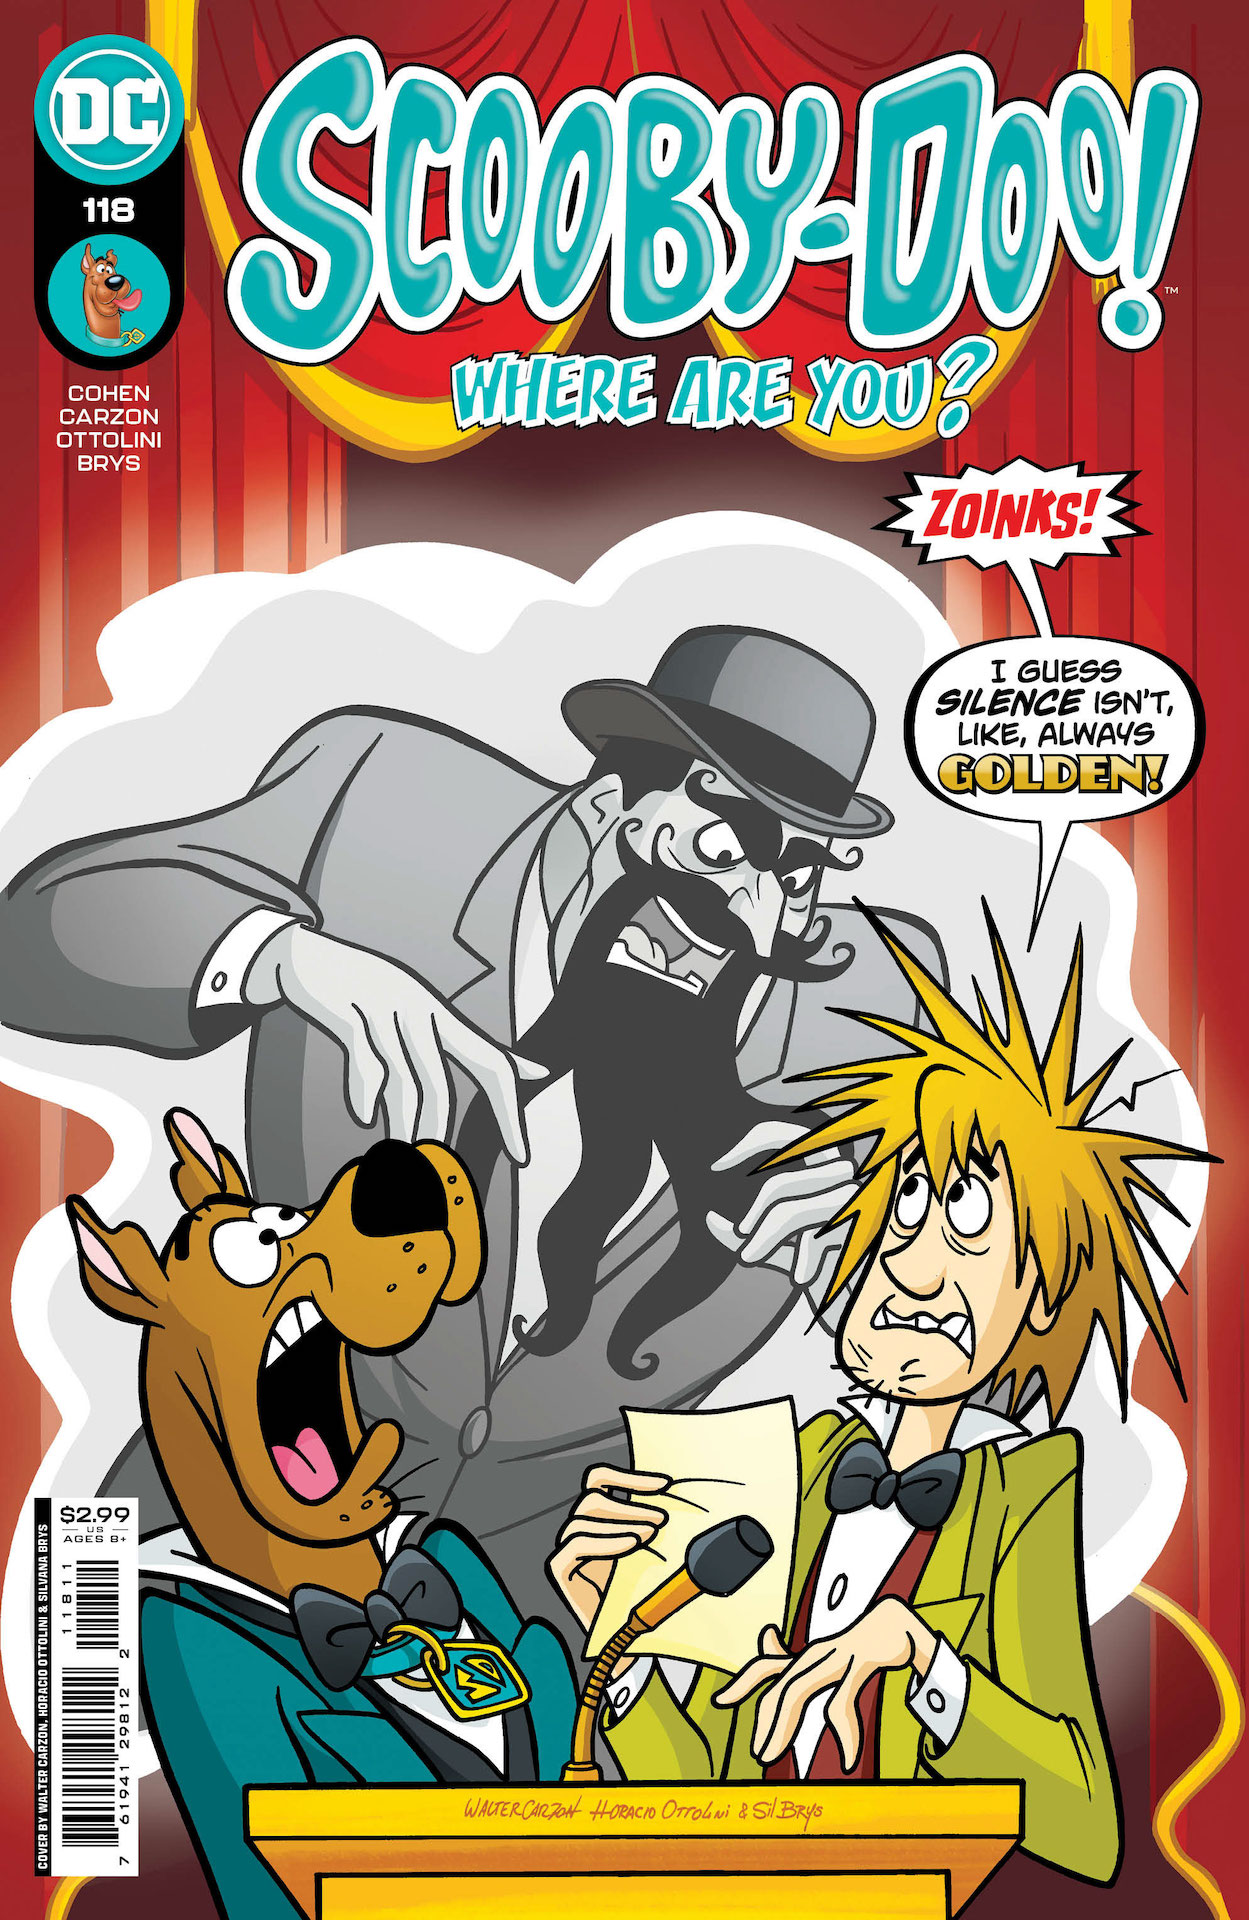 DC Preview: Scooby-Doo, Where Are You? #118